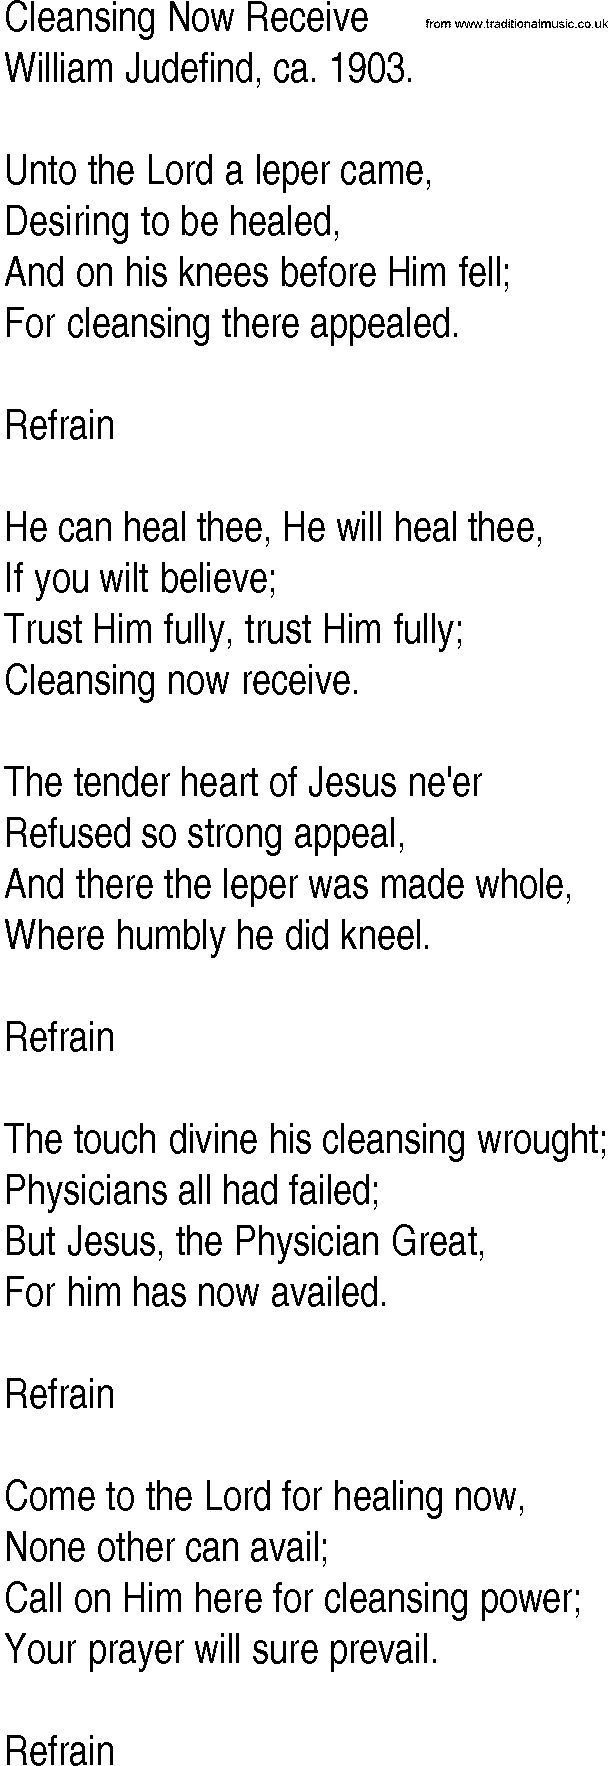 Hymn and Gospel Song: Cleansing Now Receive by William Judefind ca lyrics